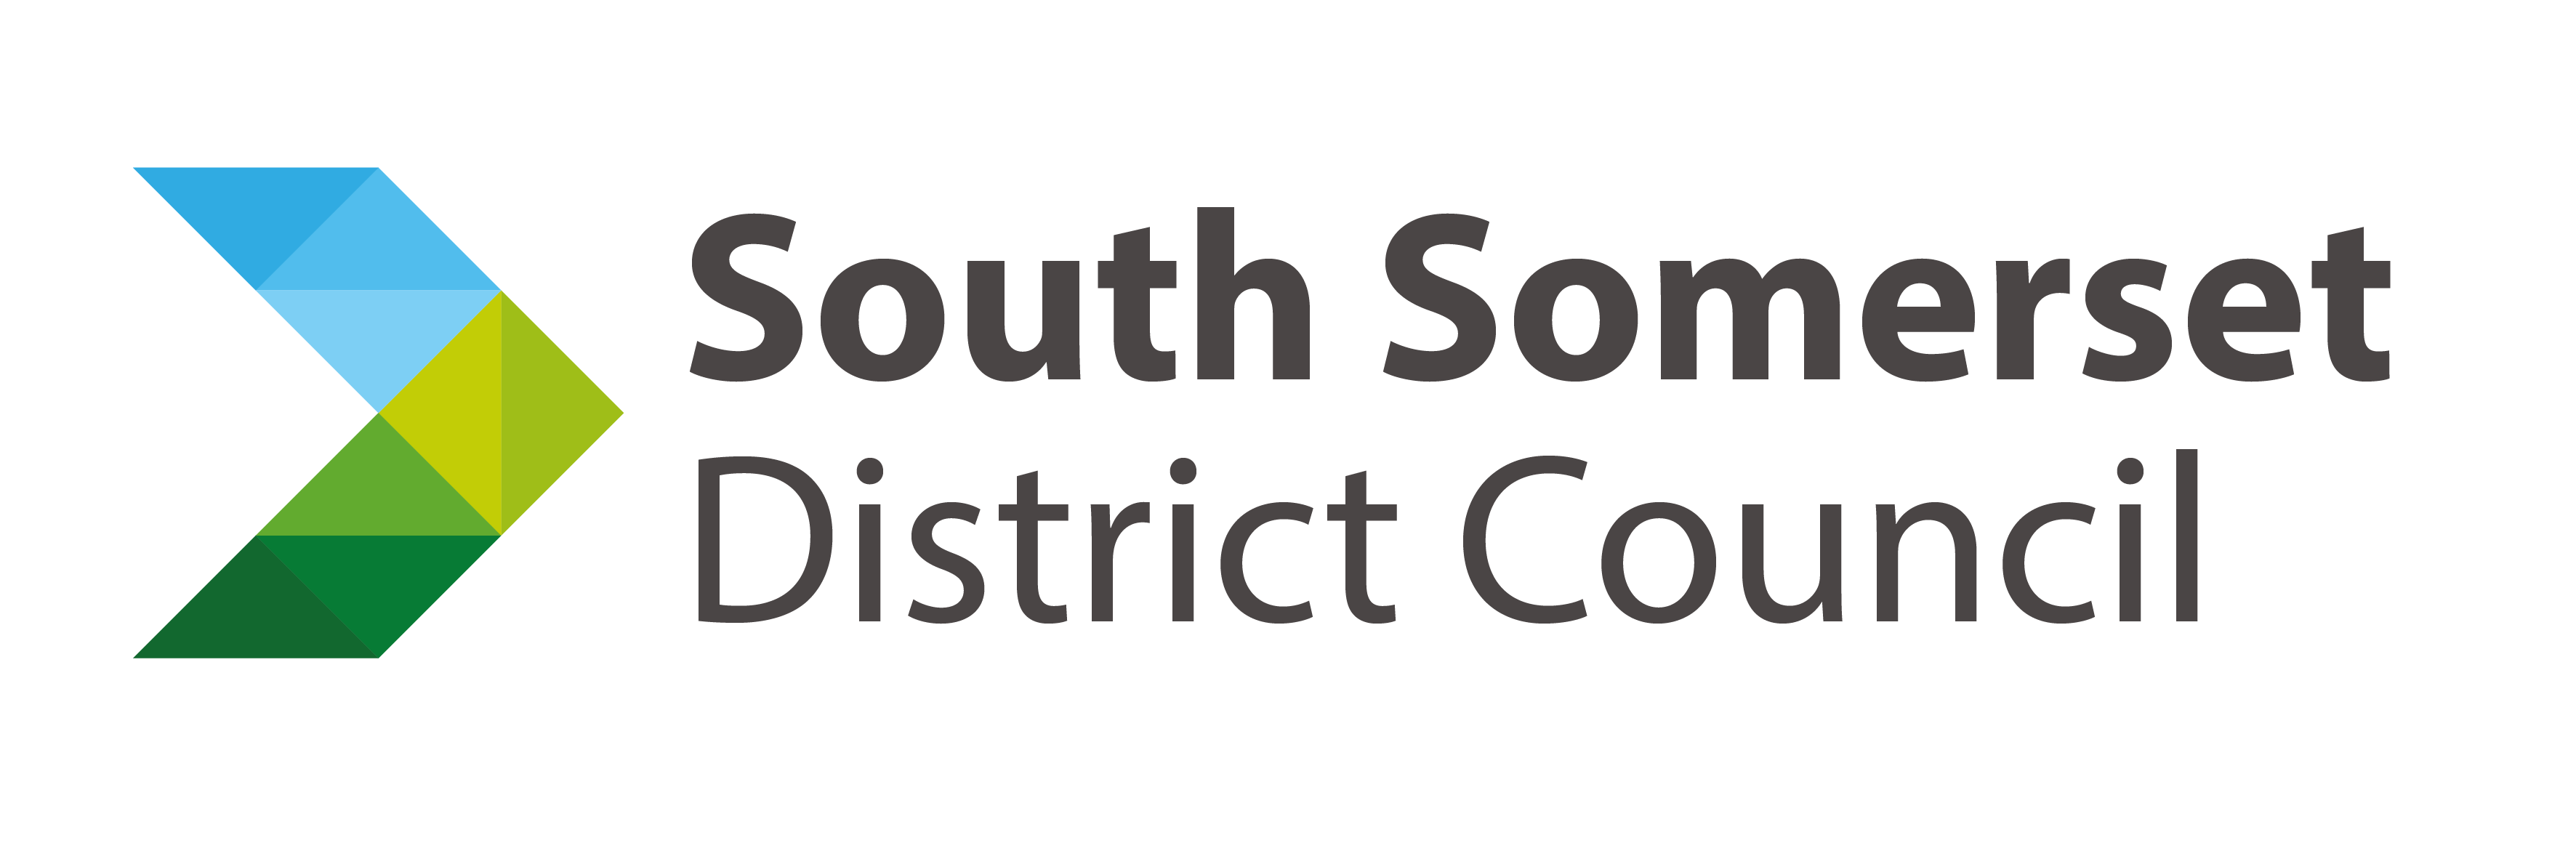 South Somerset District Council